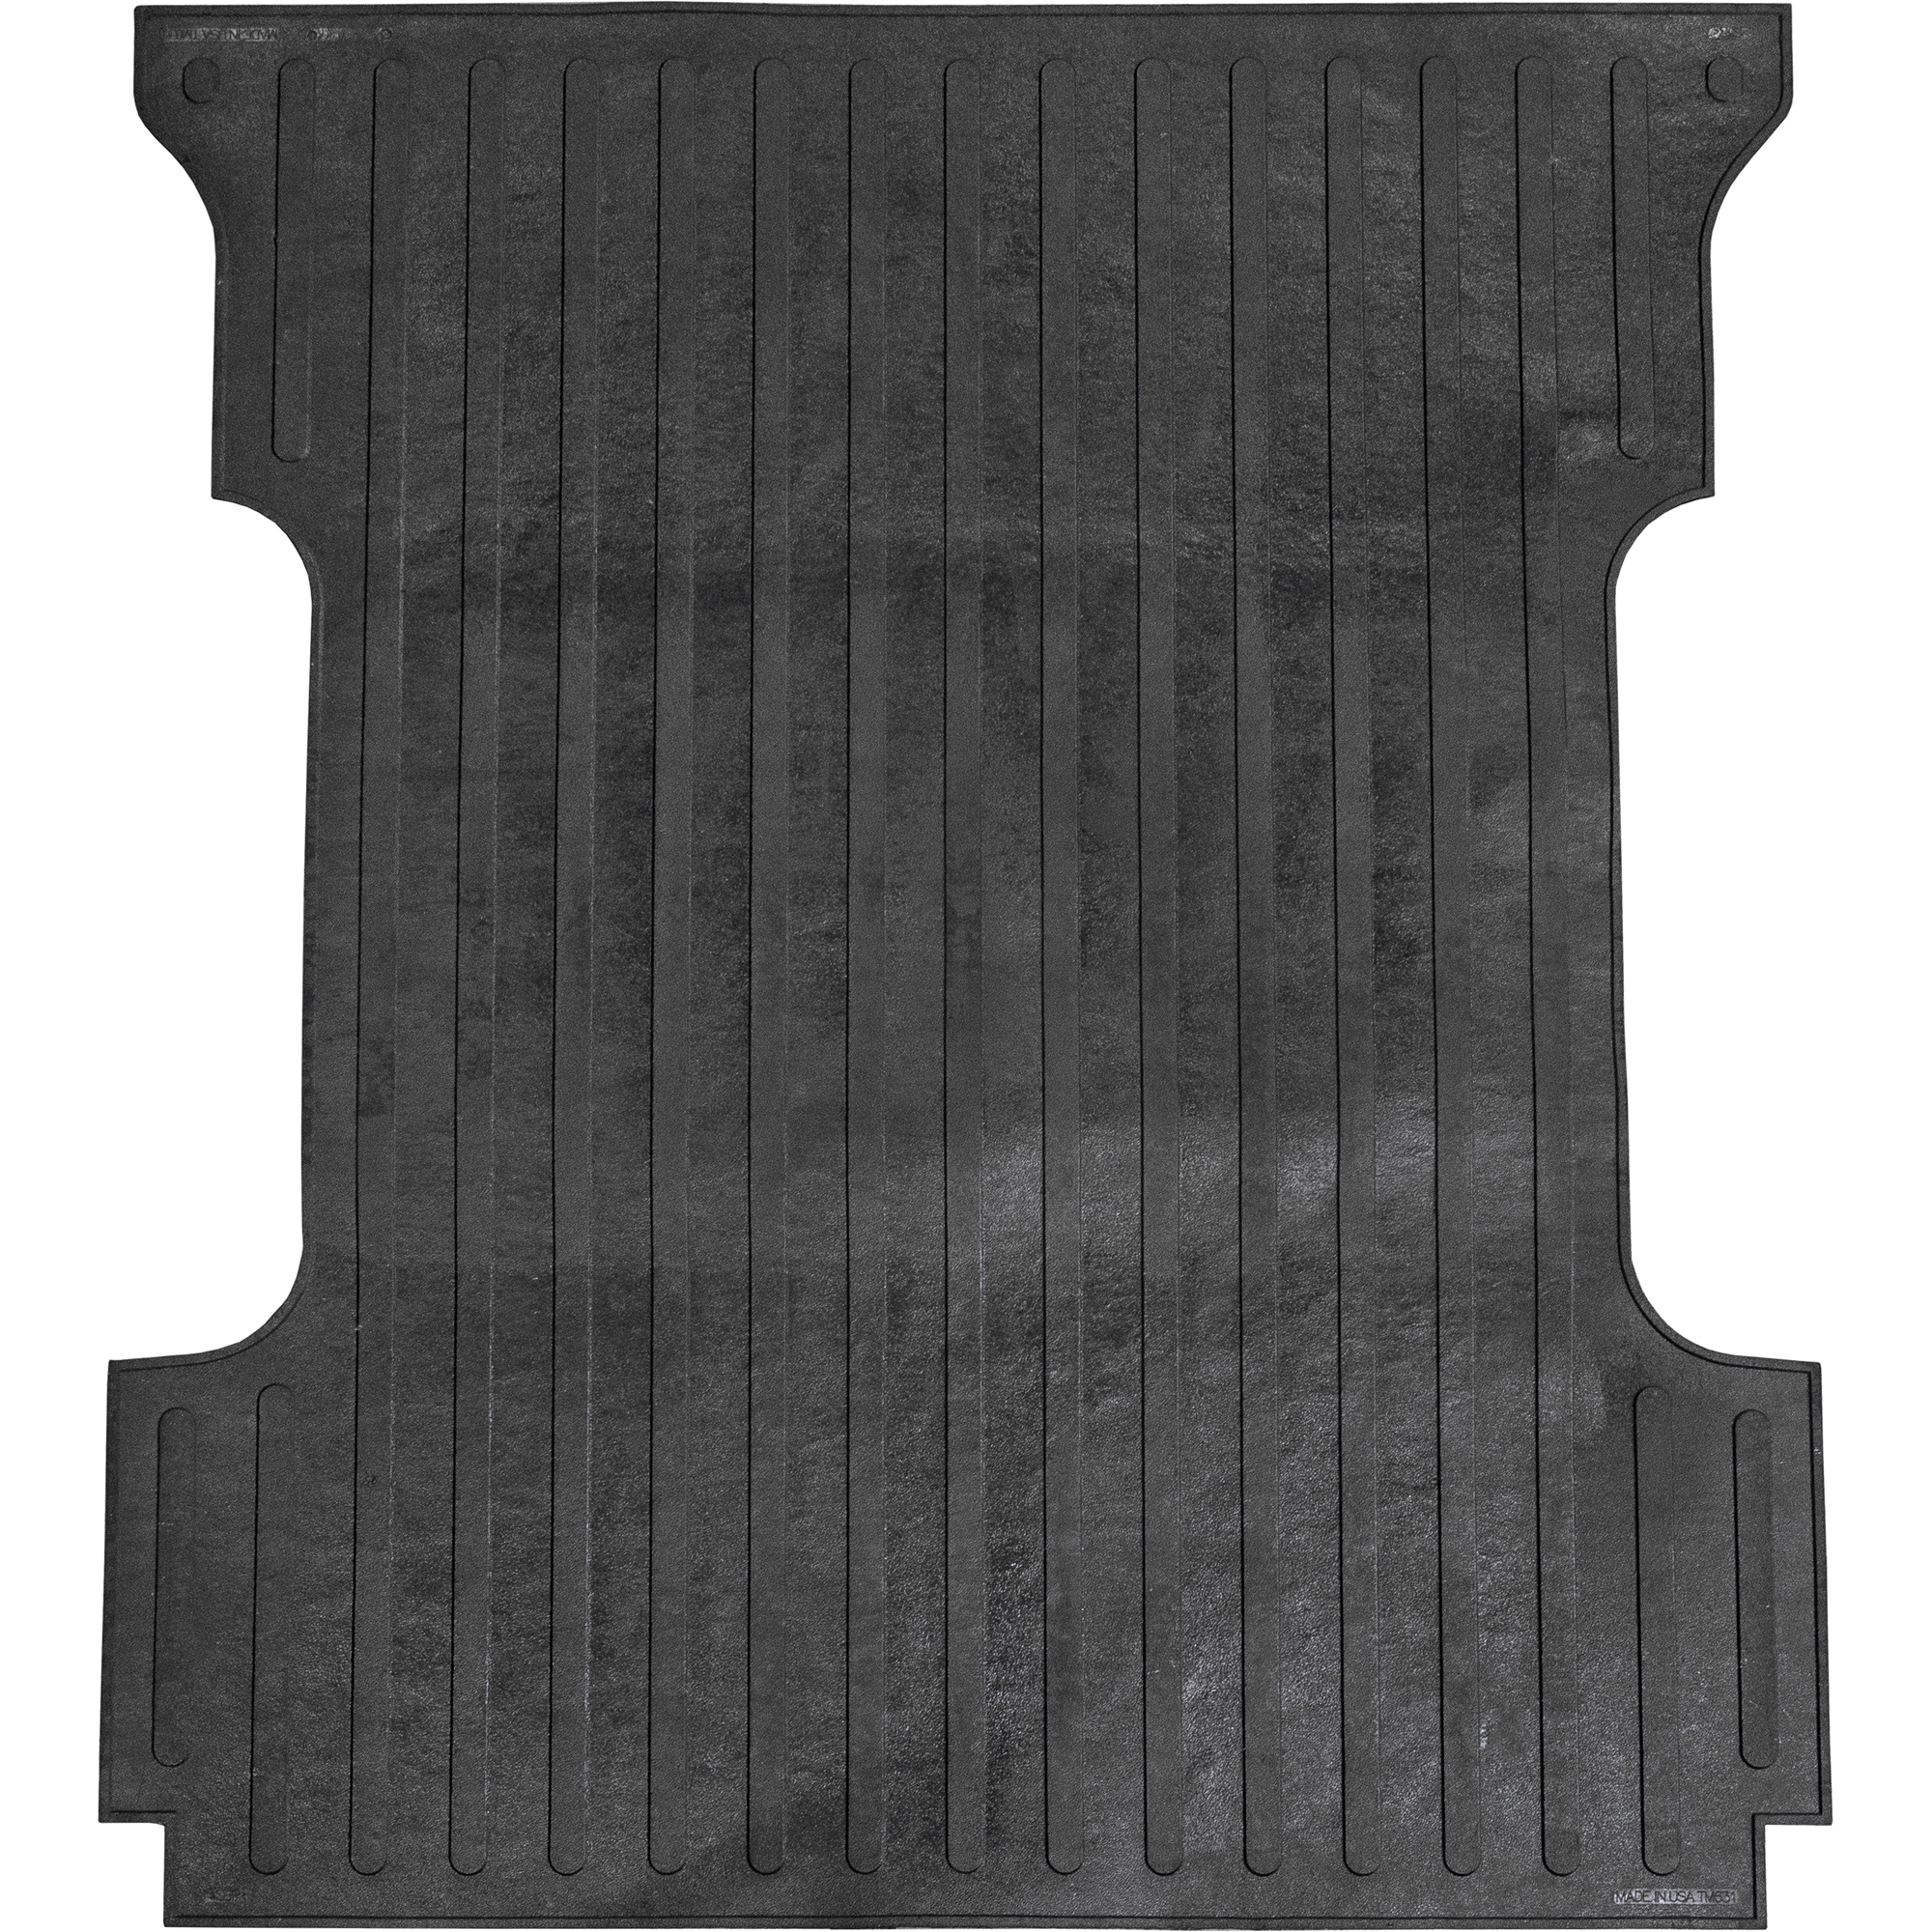 Boomerang Rubber, Ford F-150 Year 2004-2014 Bed Mat Standard Bed, 6.5ft. Long, Primary Color Black, Model TM521BAGGED